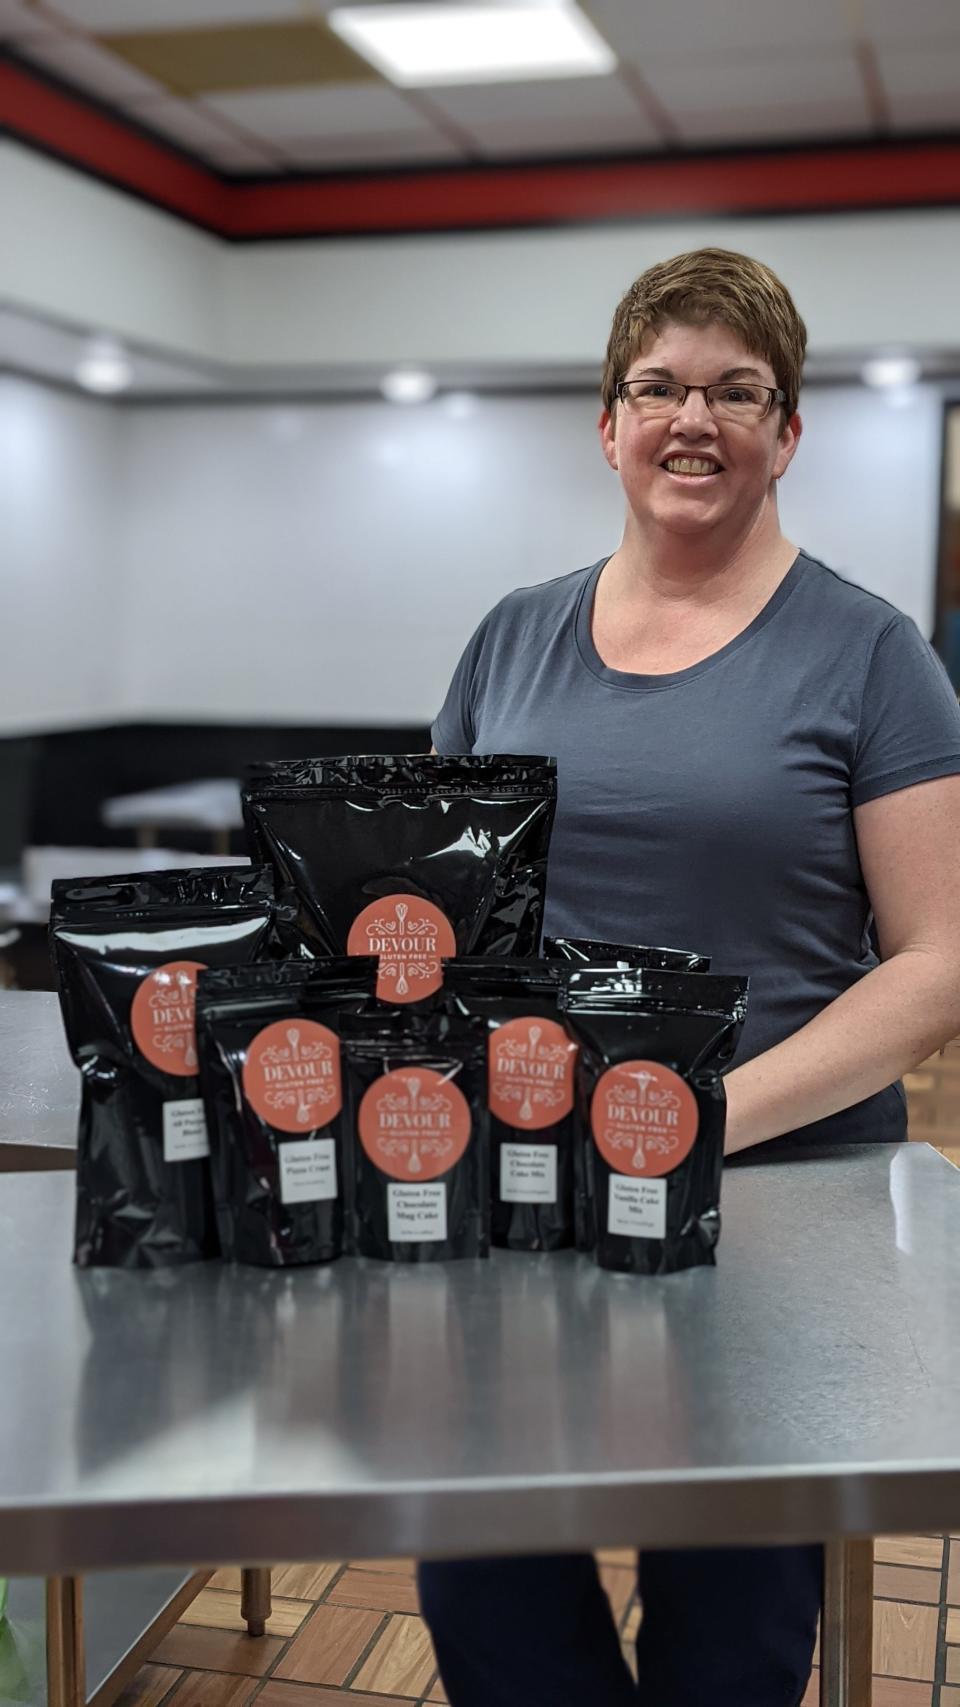 Christina Mike started her own gourmet gluten-free blend and mix business out of the Oak Creek Common Cookhouse called Devour Gluten Free. She’s still figuring out the next steps after a fire at the Cookhouse.